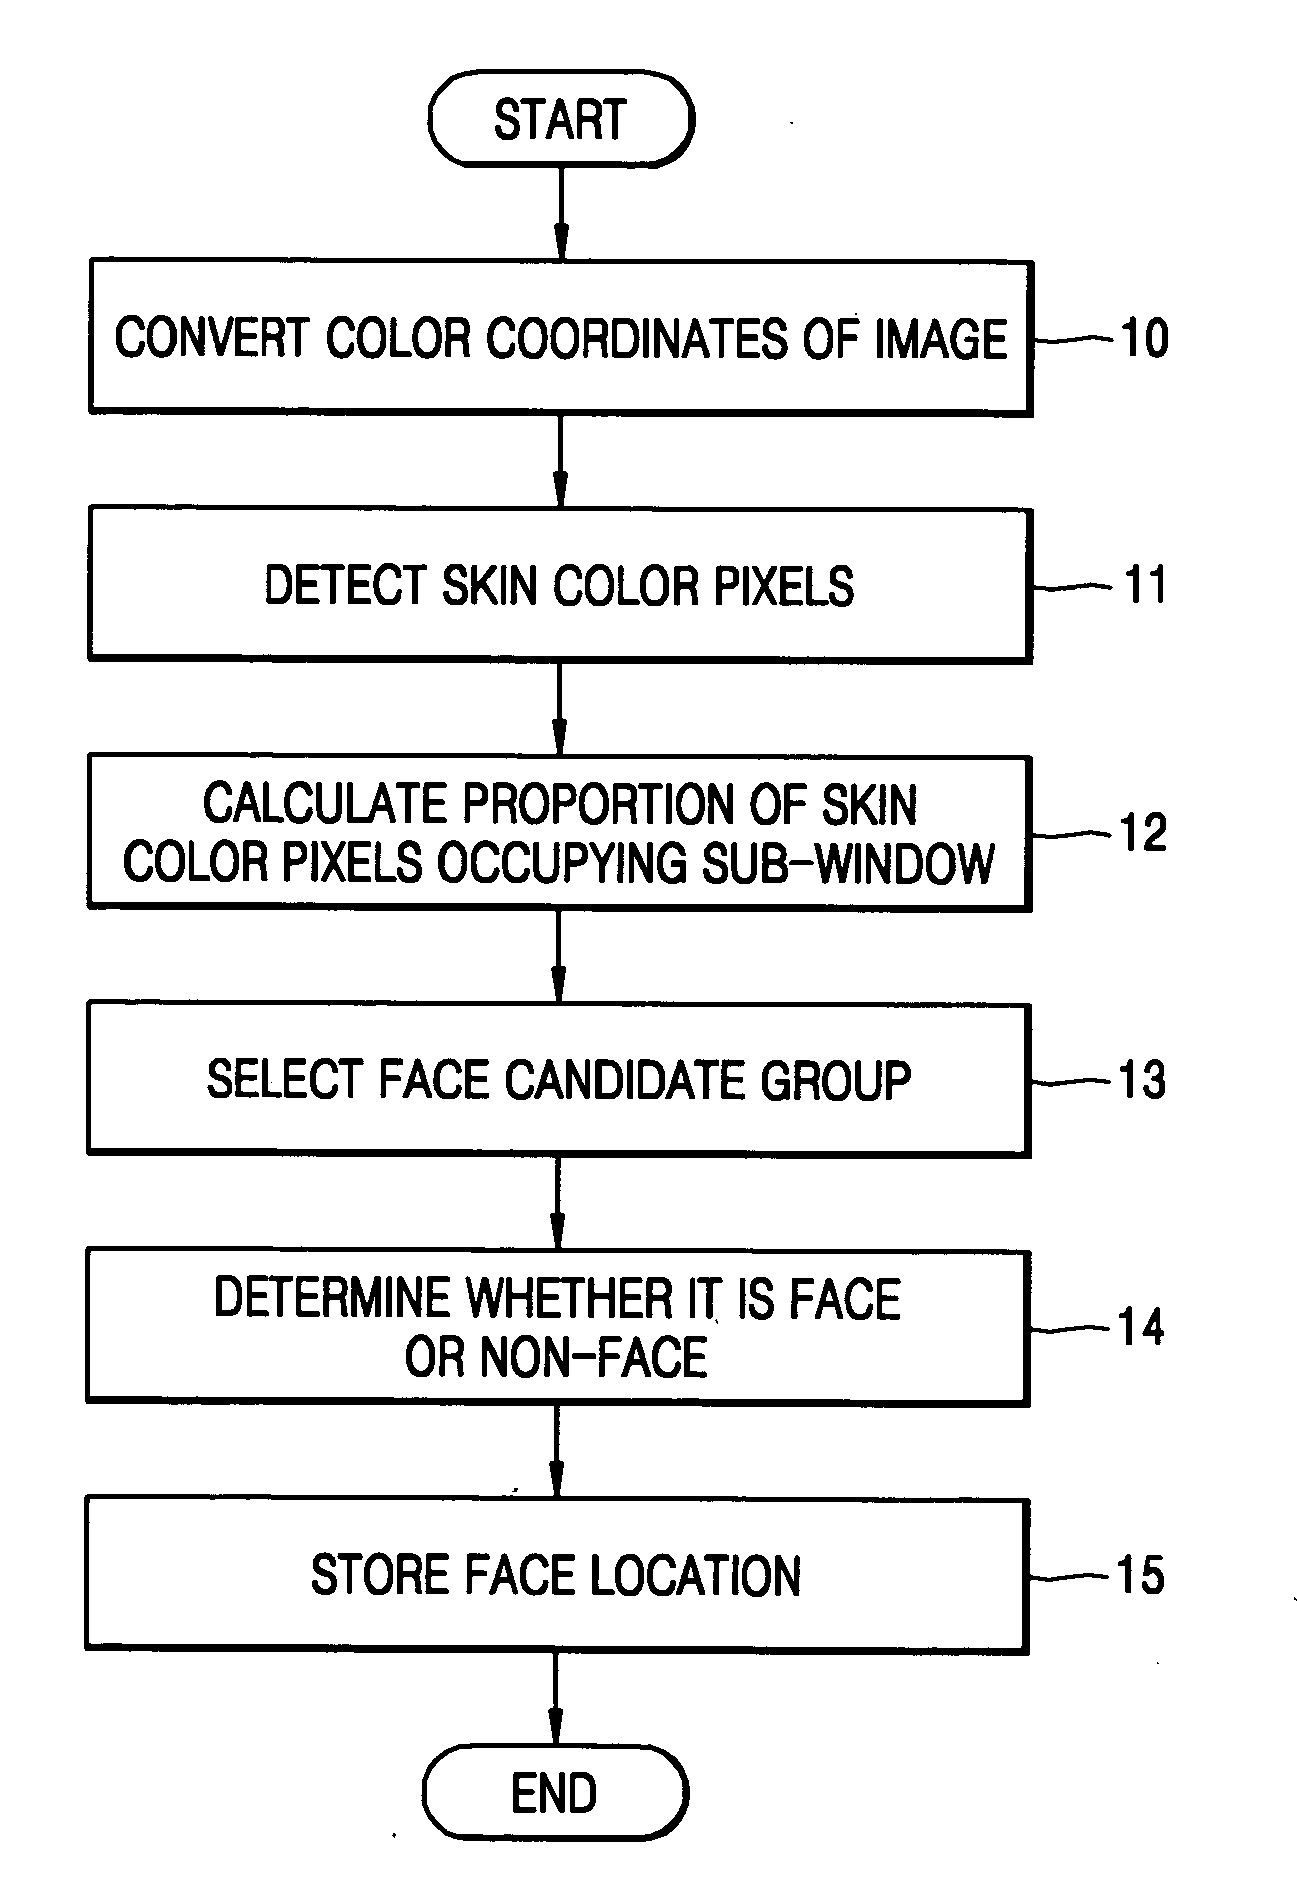 Face detection method based on skin color and pattern match